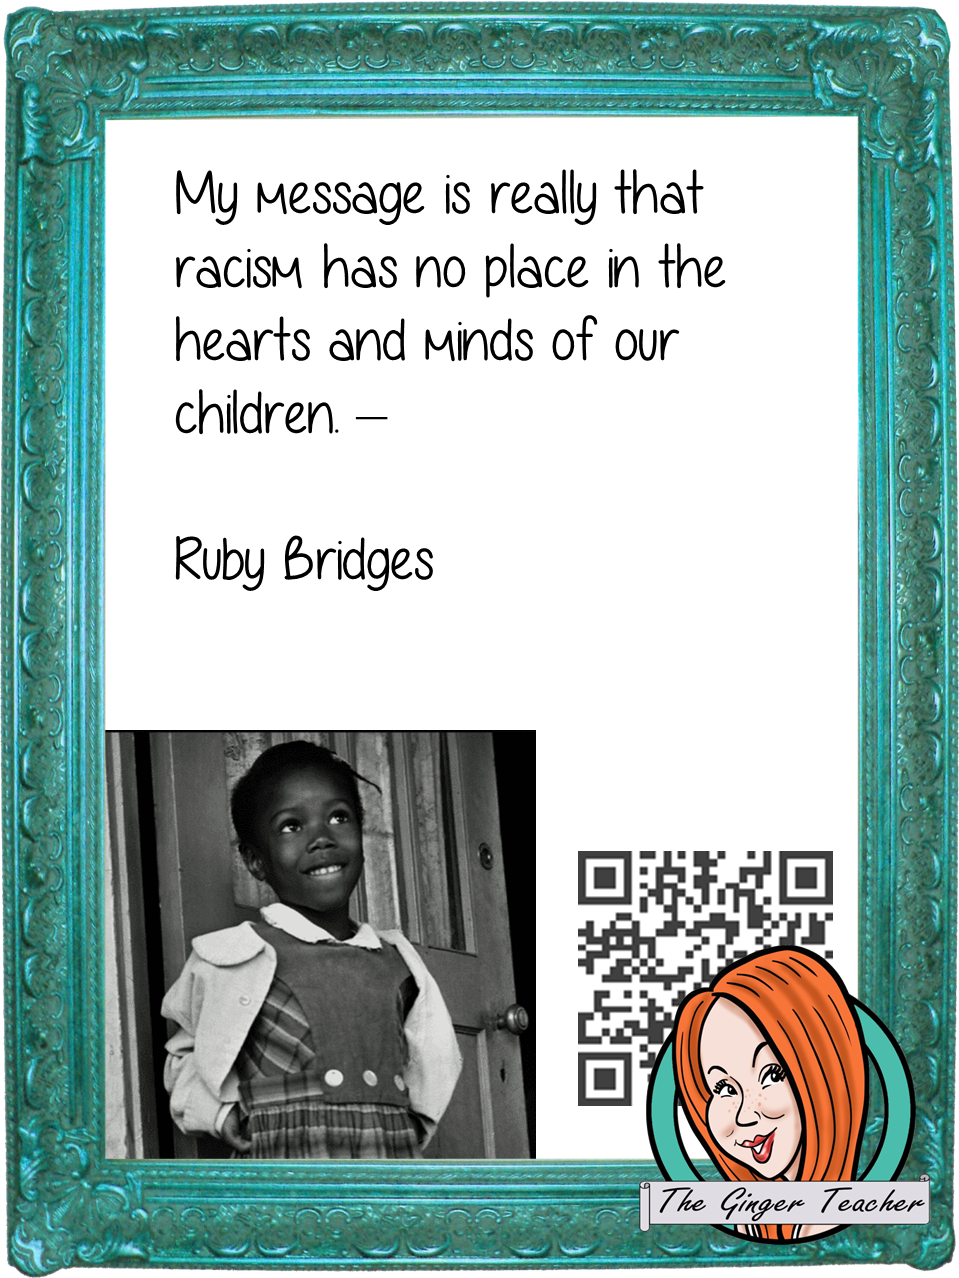 Ruby Bridges Interactive Quote Poster Augmented Reality (AR) interactive quote poster This poster can be printed and used in your classroom access the augmented reality aspects of this poster download the free Metaverse AR (augmented reality) app. Ruby Bridges will appear in your classroom to give your kids extra facts and a short video. Included are two posters one color and one black and white with AR codes for interactive content #blackhistorymonth #blackhistory #rubybridges